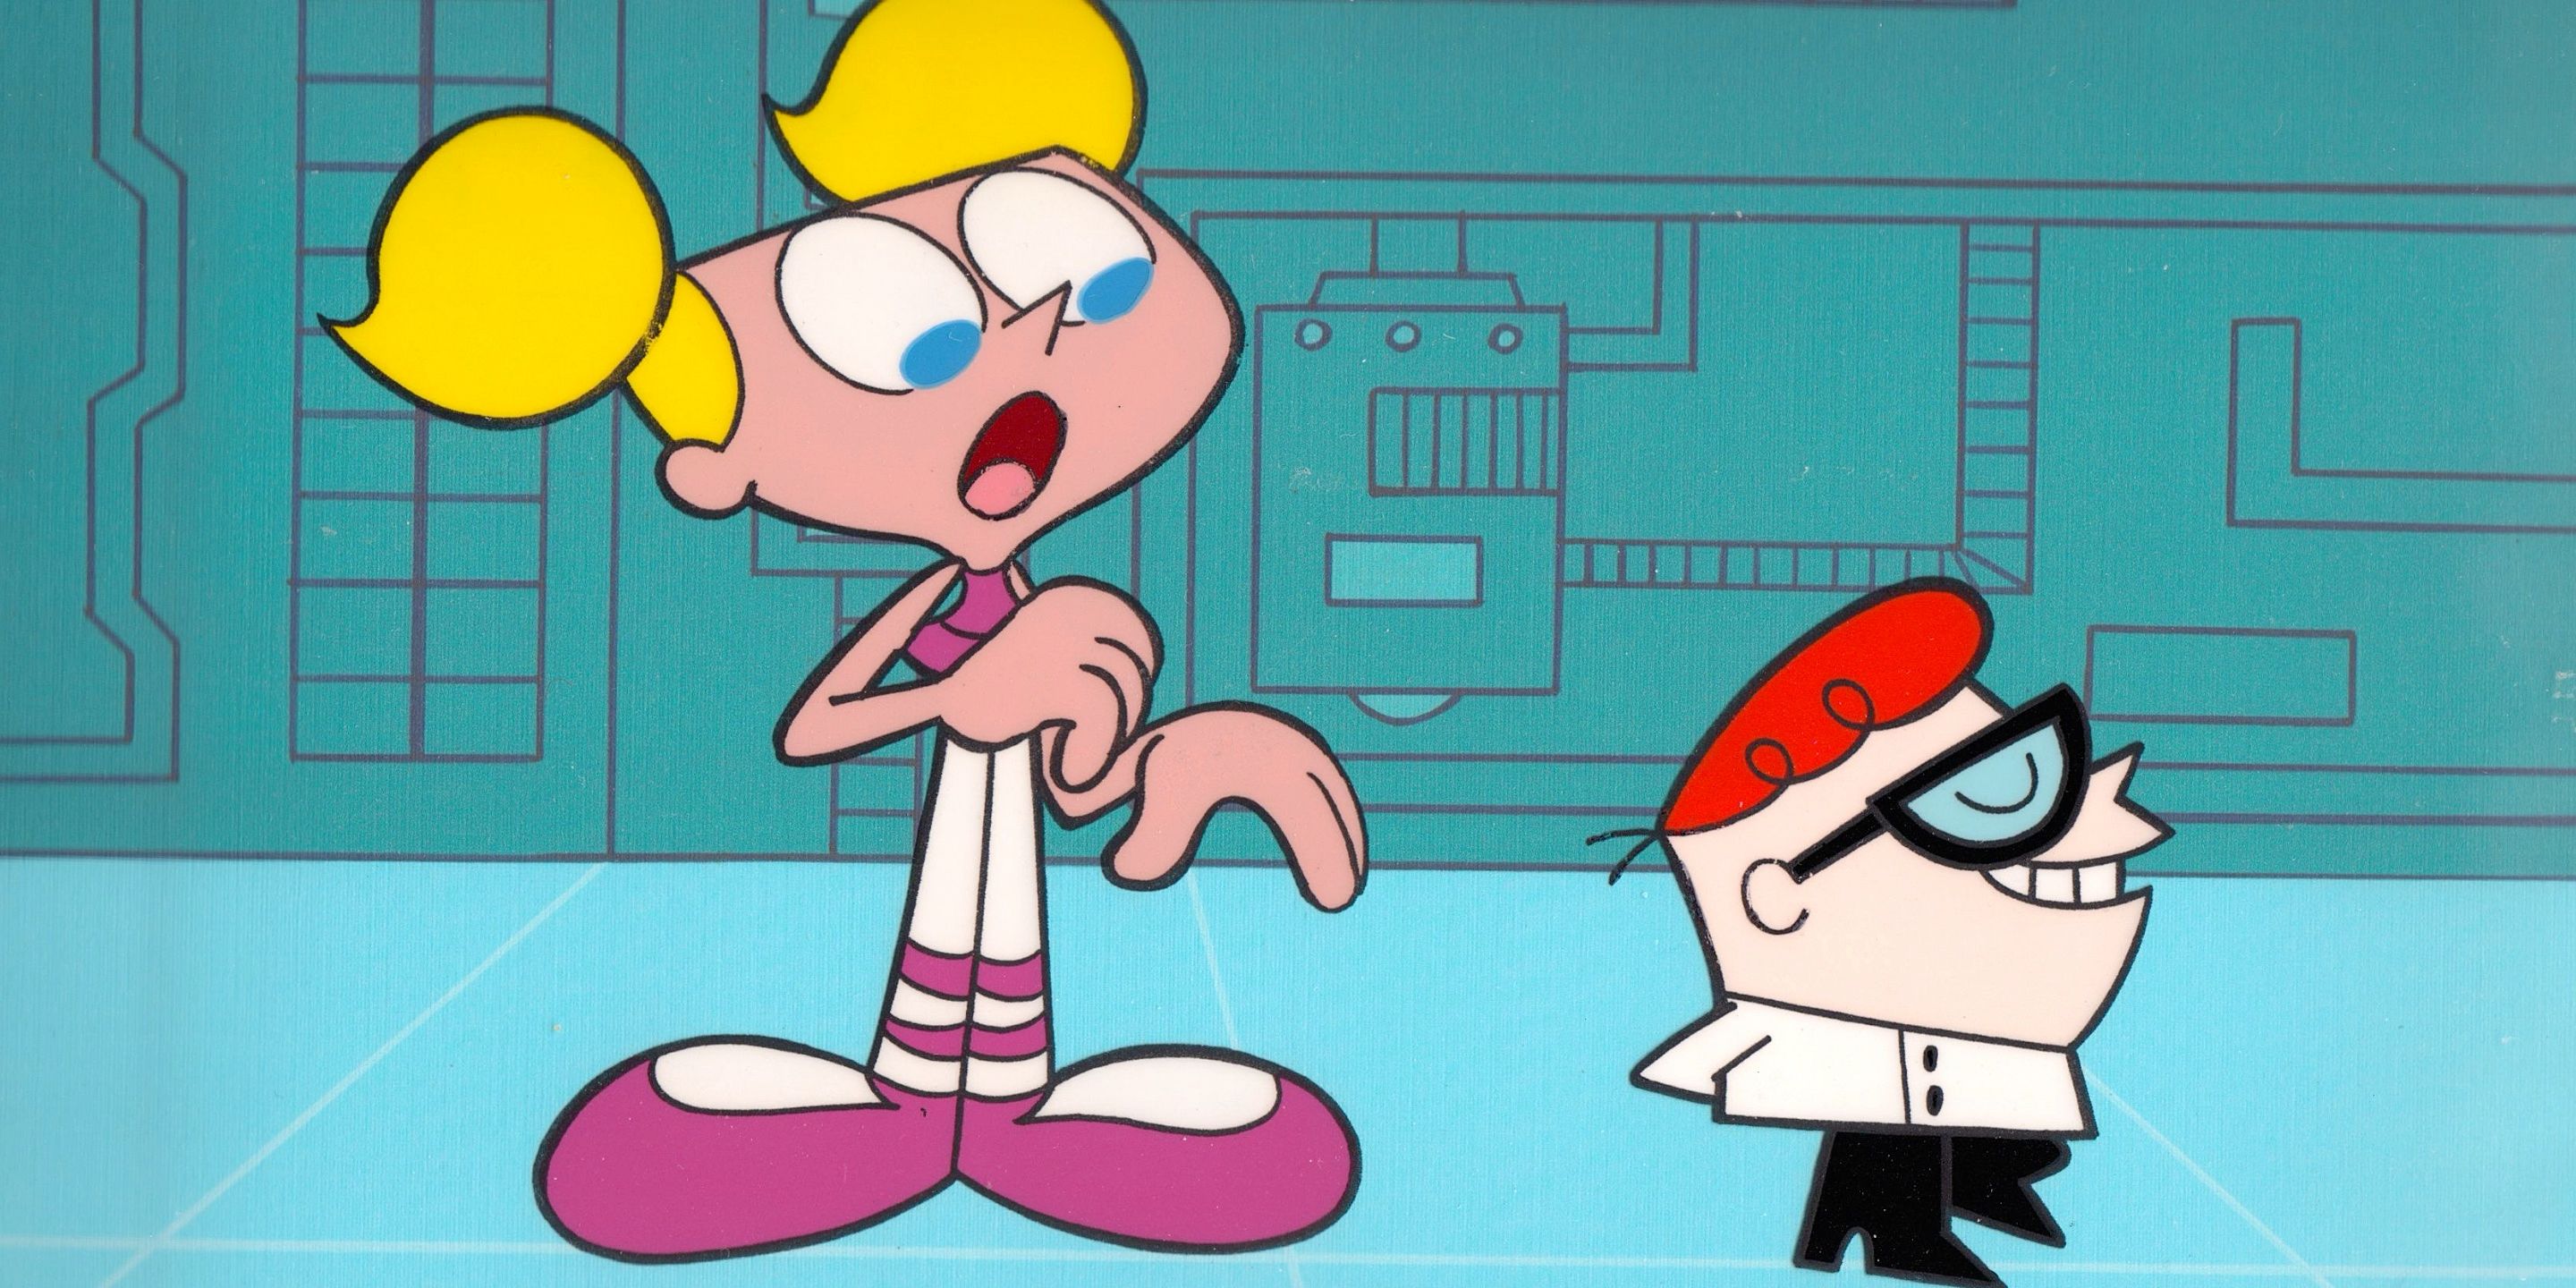 Dee-Dee and Dexter from Dexter's Laboratory